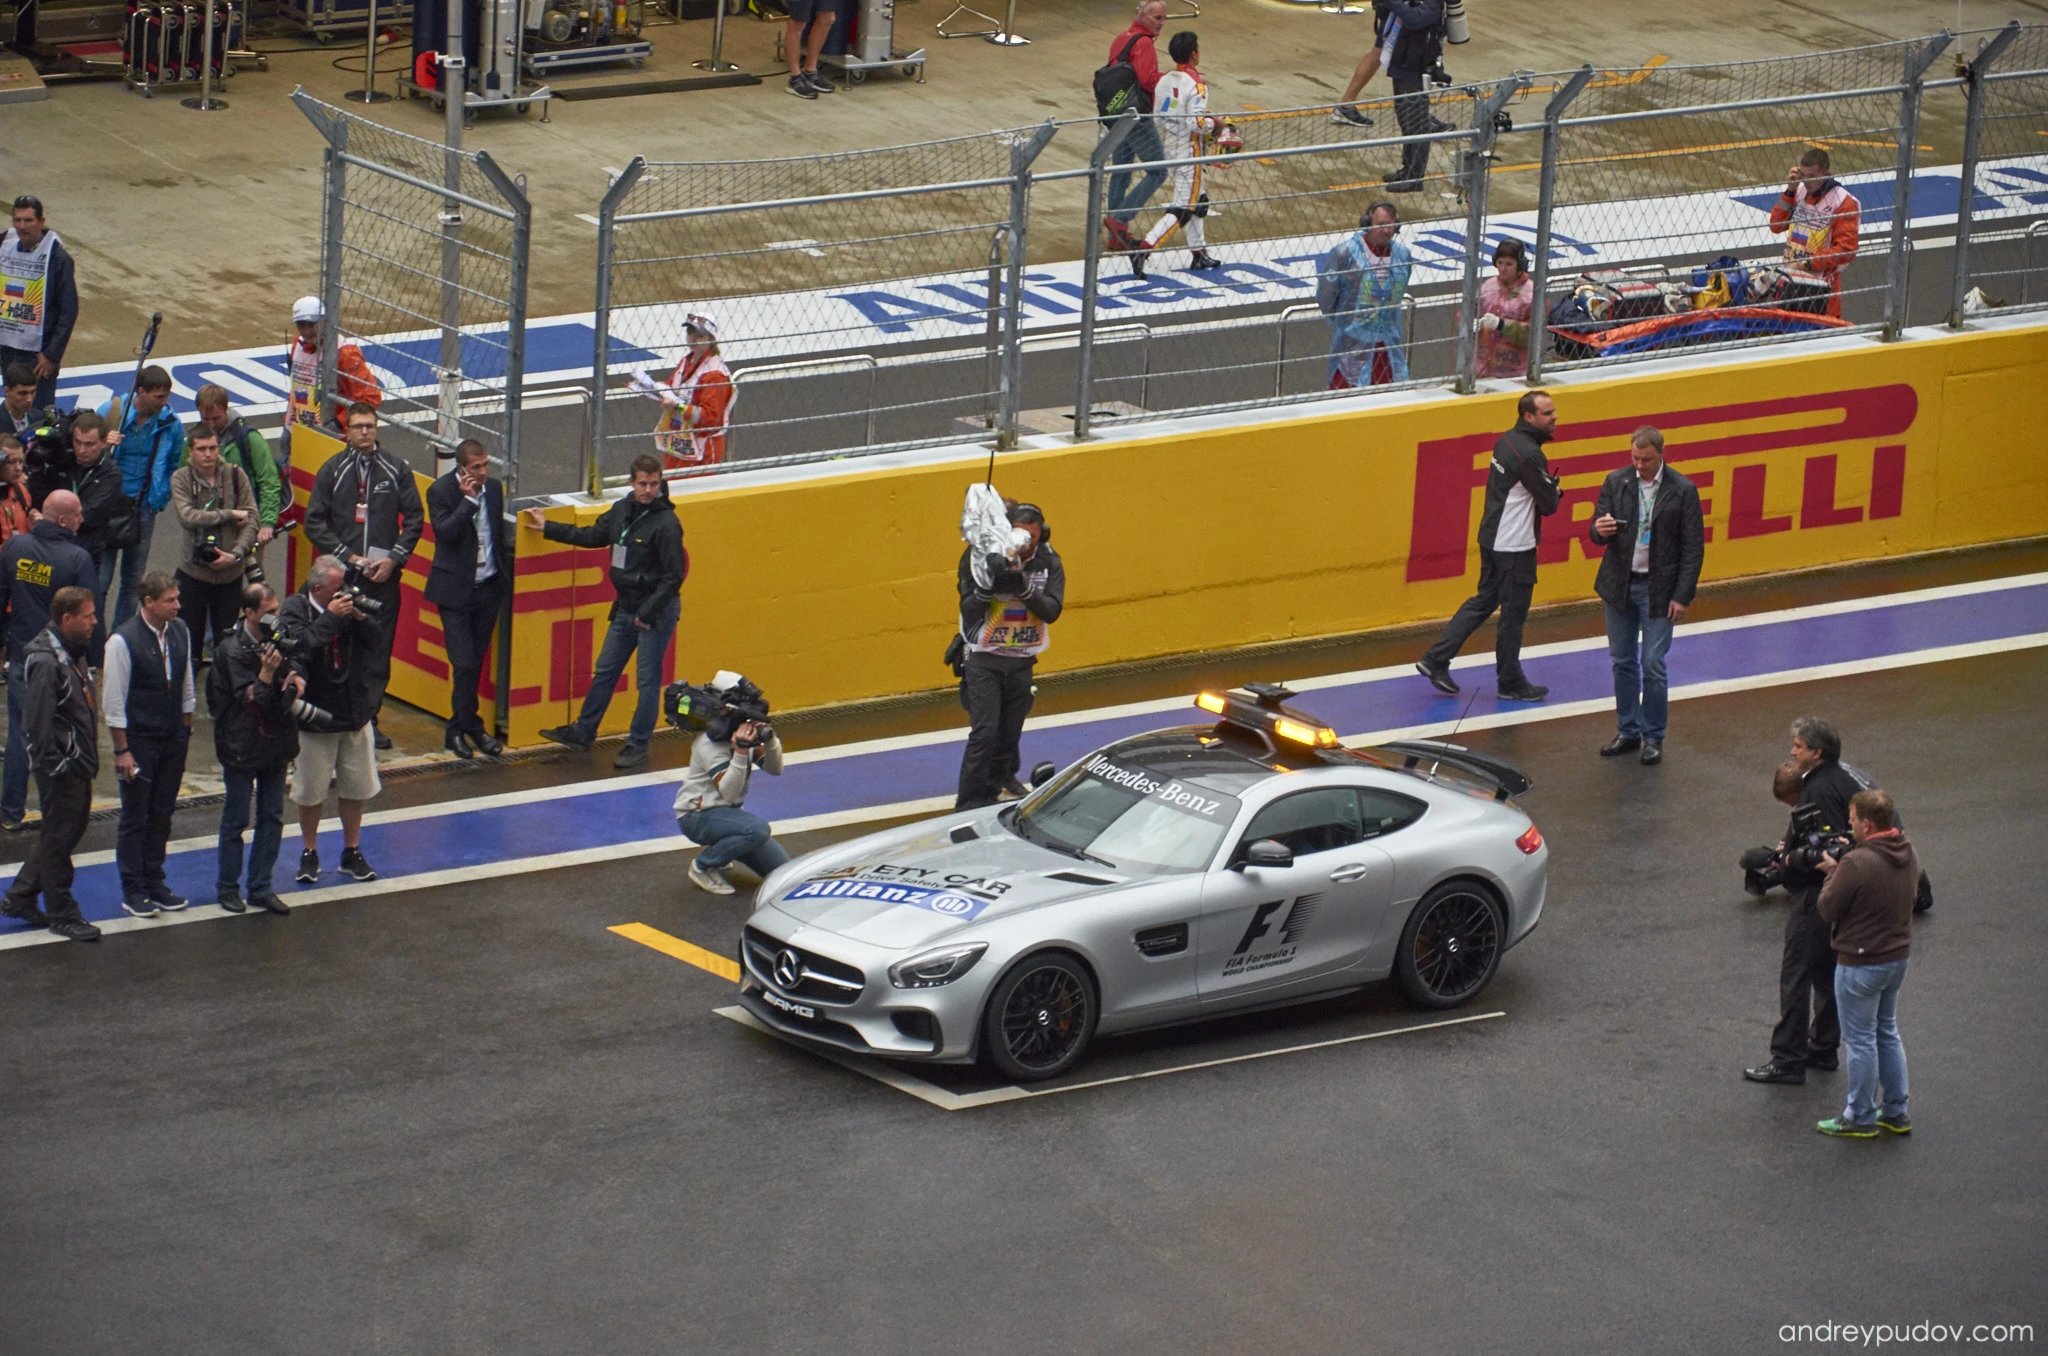 Governor of Krasnodar Krai Aleksandr Tkachov (driving) and chief executive of the Formula One Group Bernie Ecclestone on an excursion across the Olympic Pack by the Safety car.